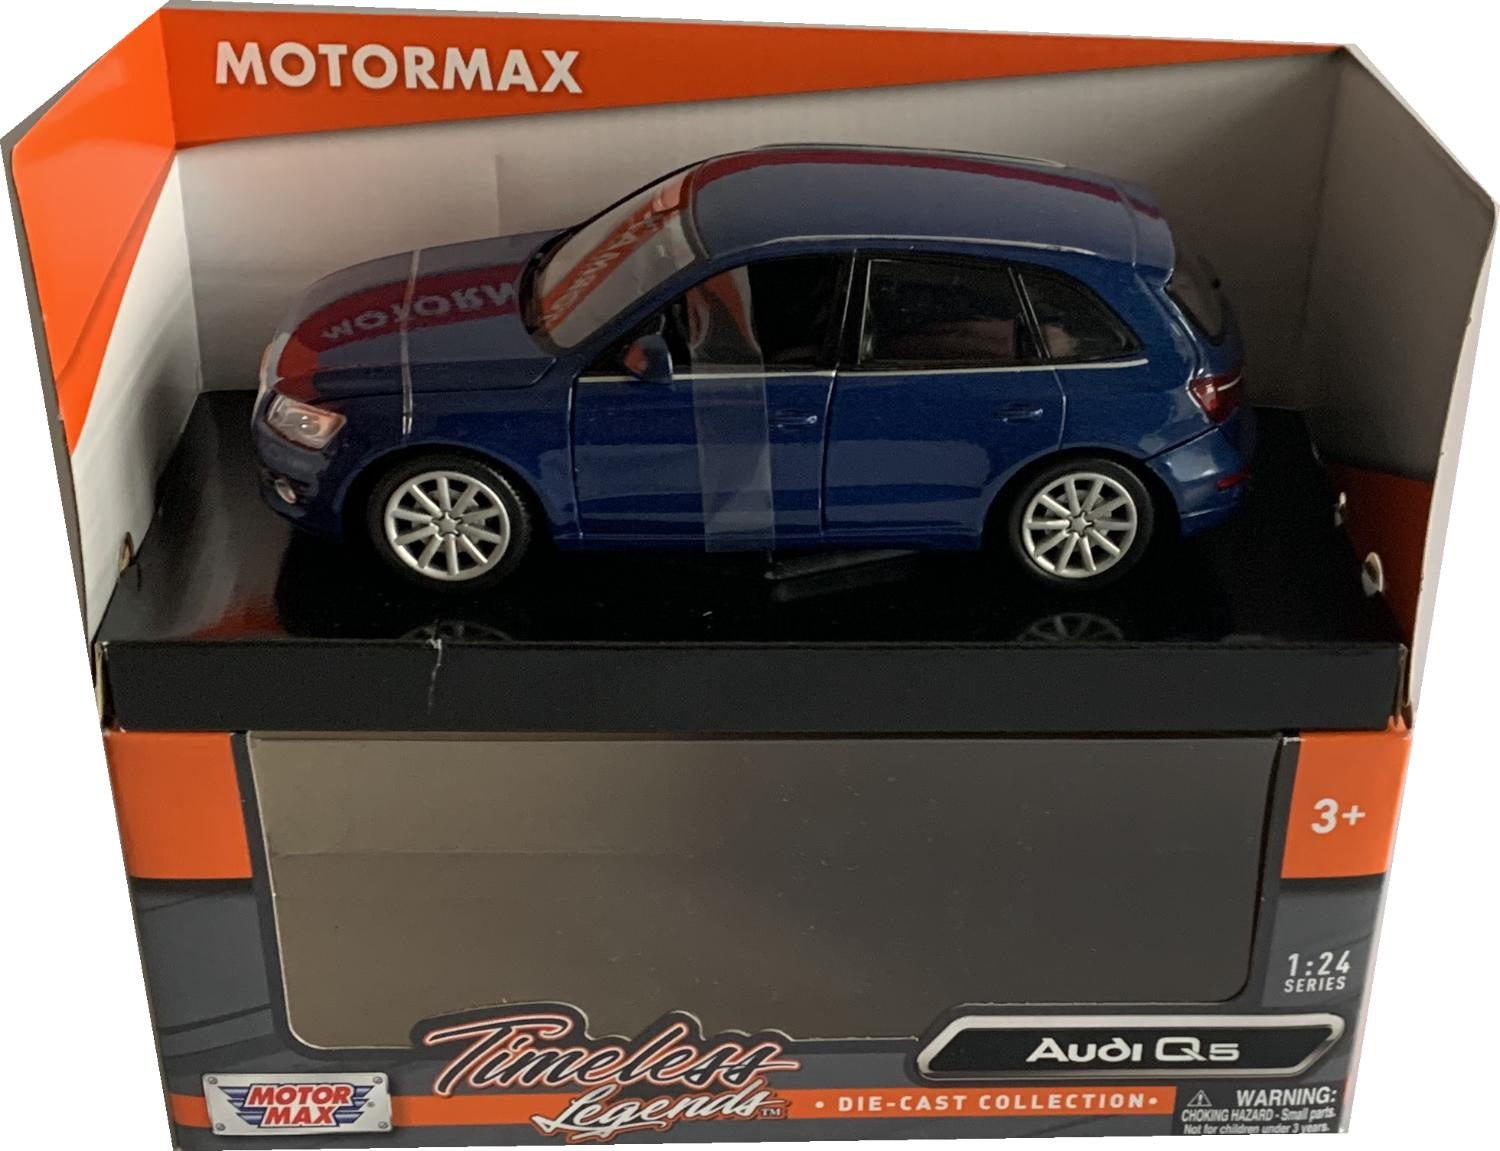 A good reproduction of the Audi Q5 with detail throughout, all authentically recreated.  The model is presented in a window display box, the car is approx. 19 cm long and the presentation box is 24.5 cm